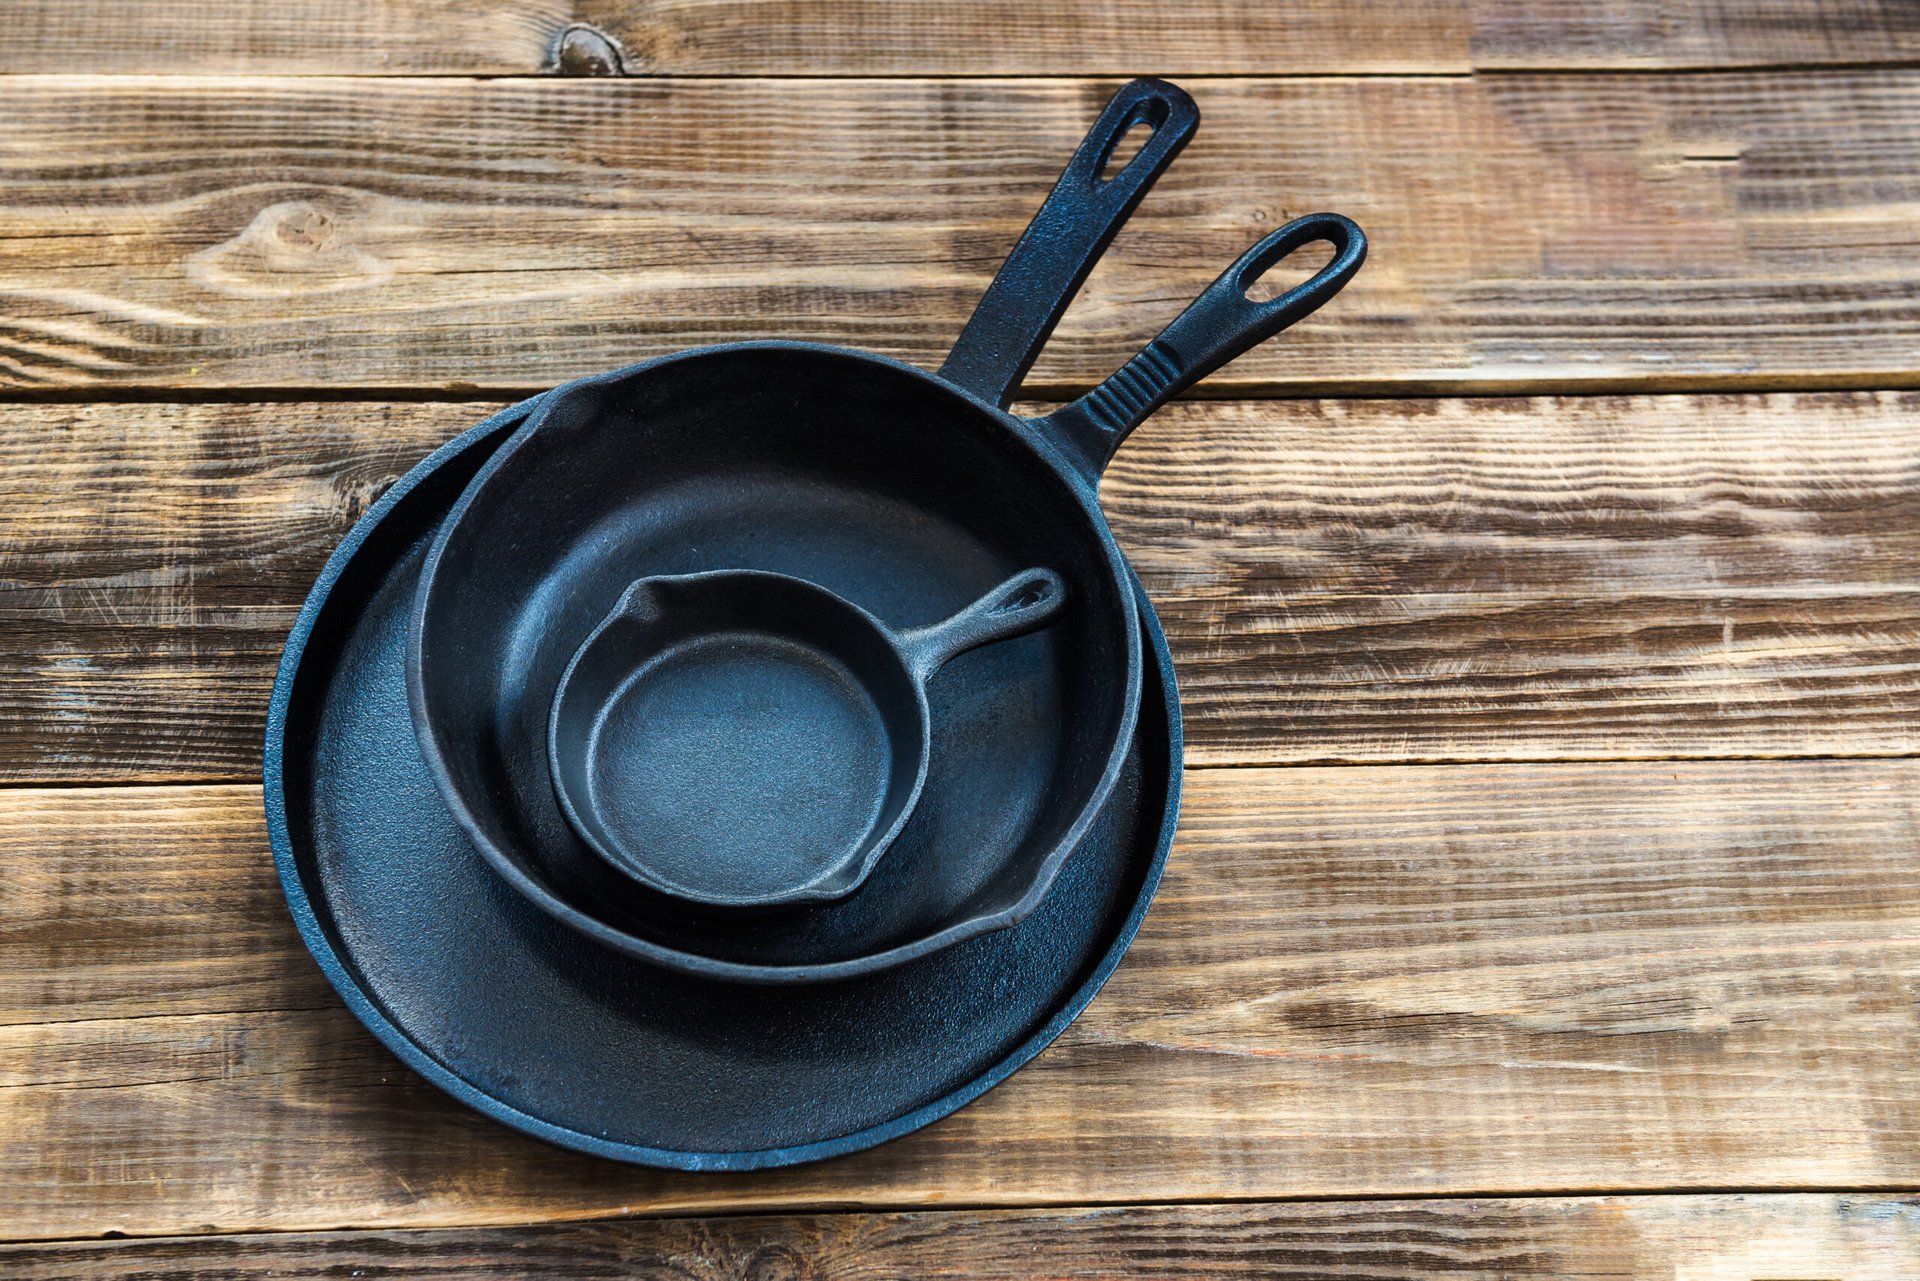 How to Thrift Shop for Vintage Griswold Cast Iron Cookware